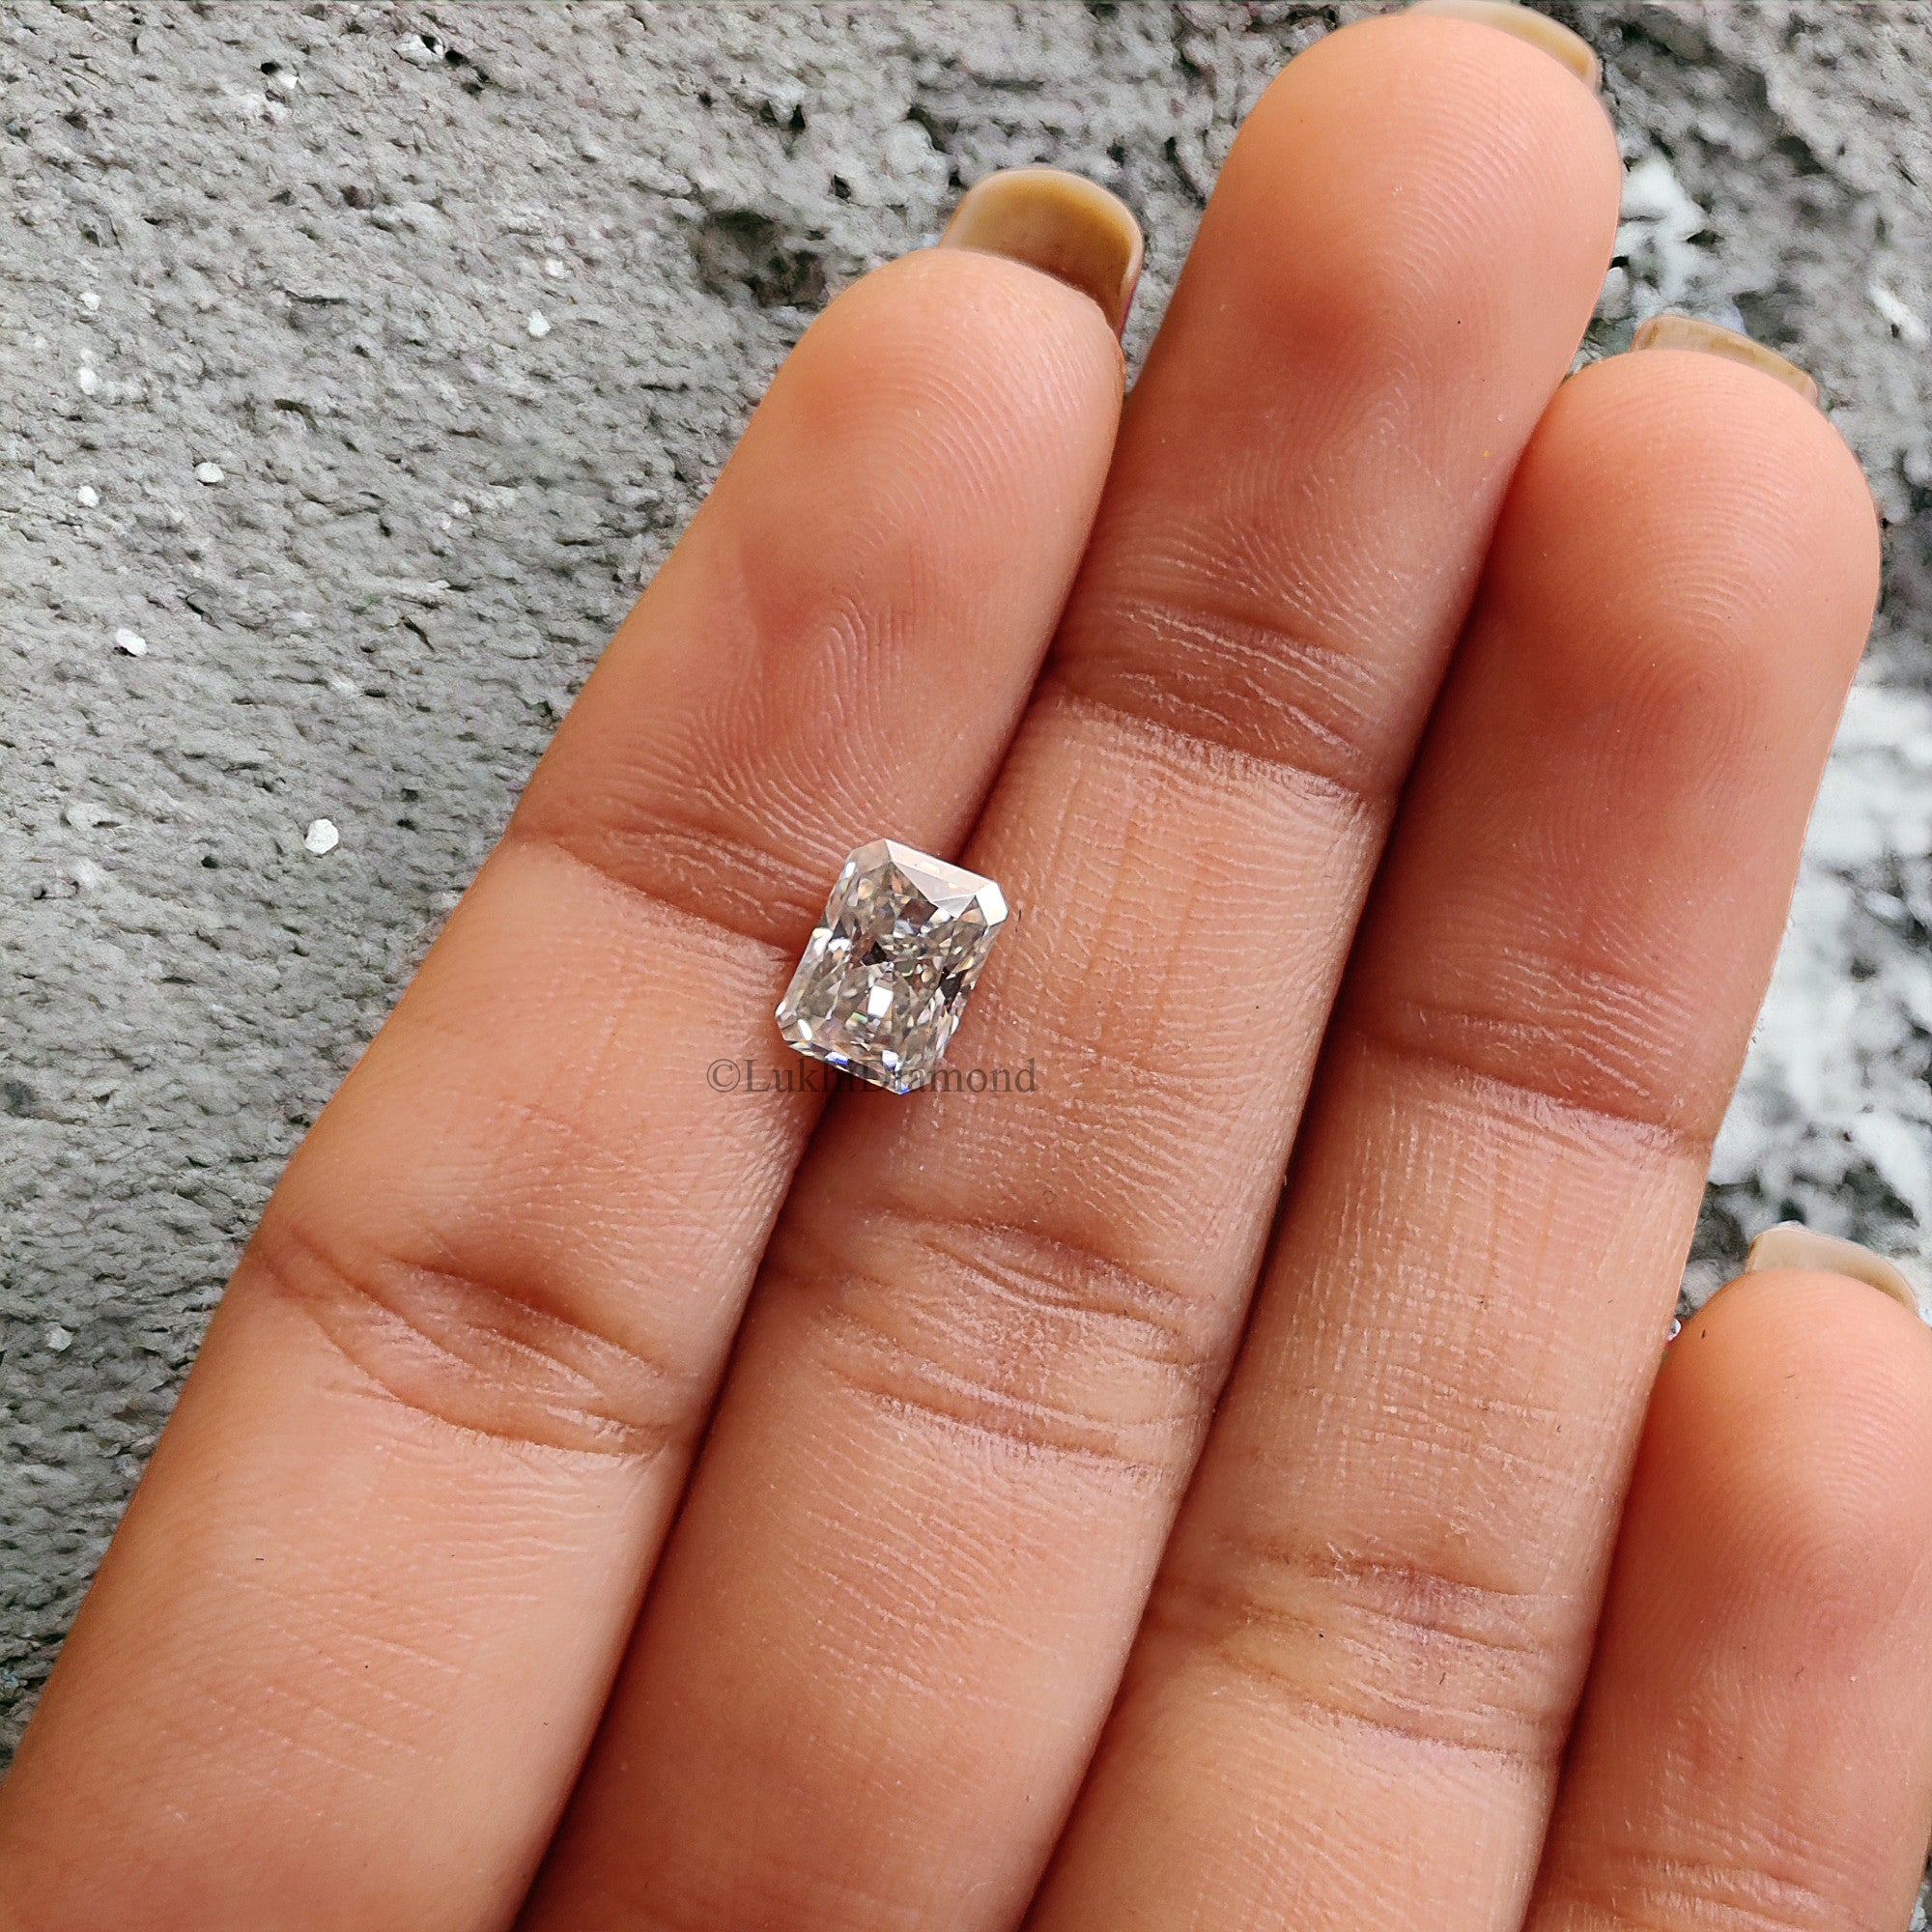 Radiant Brilliant Cut Loose White Moissanite Stone 1.0 To 5.0 CT Vintage Antique Handcrafted Eye Clean Moissanite Engagement Gift Ring Q129